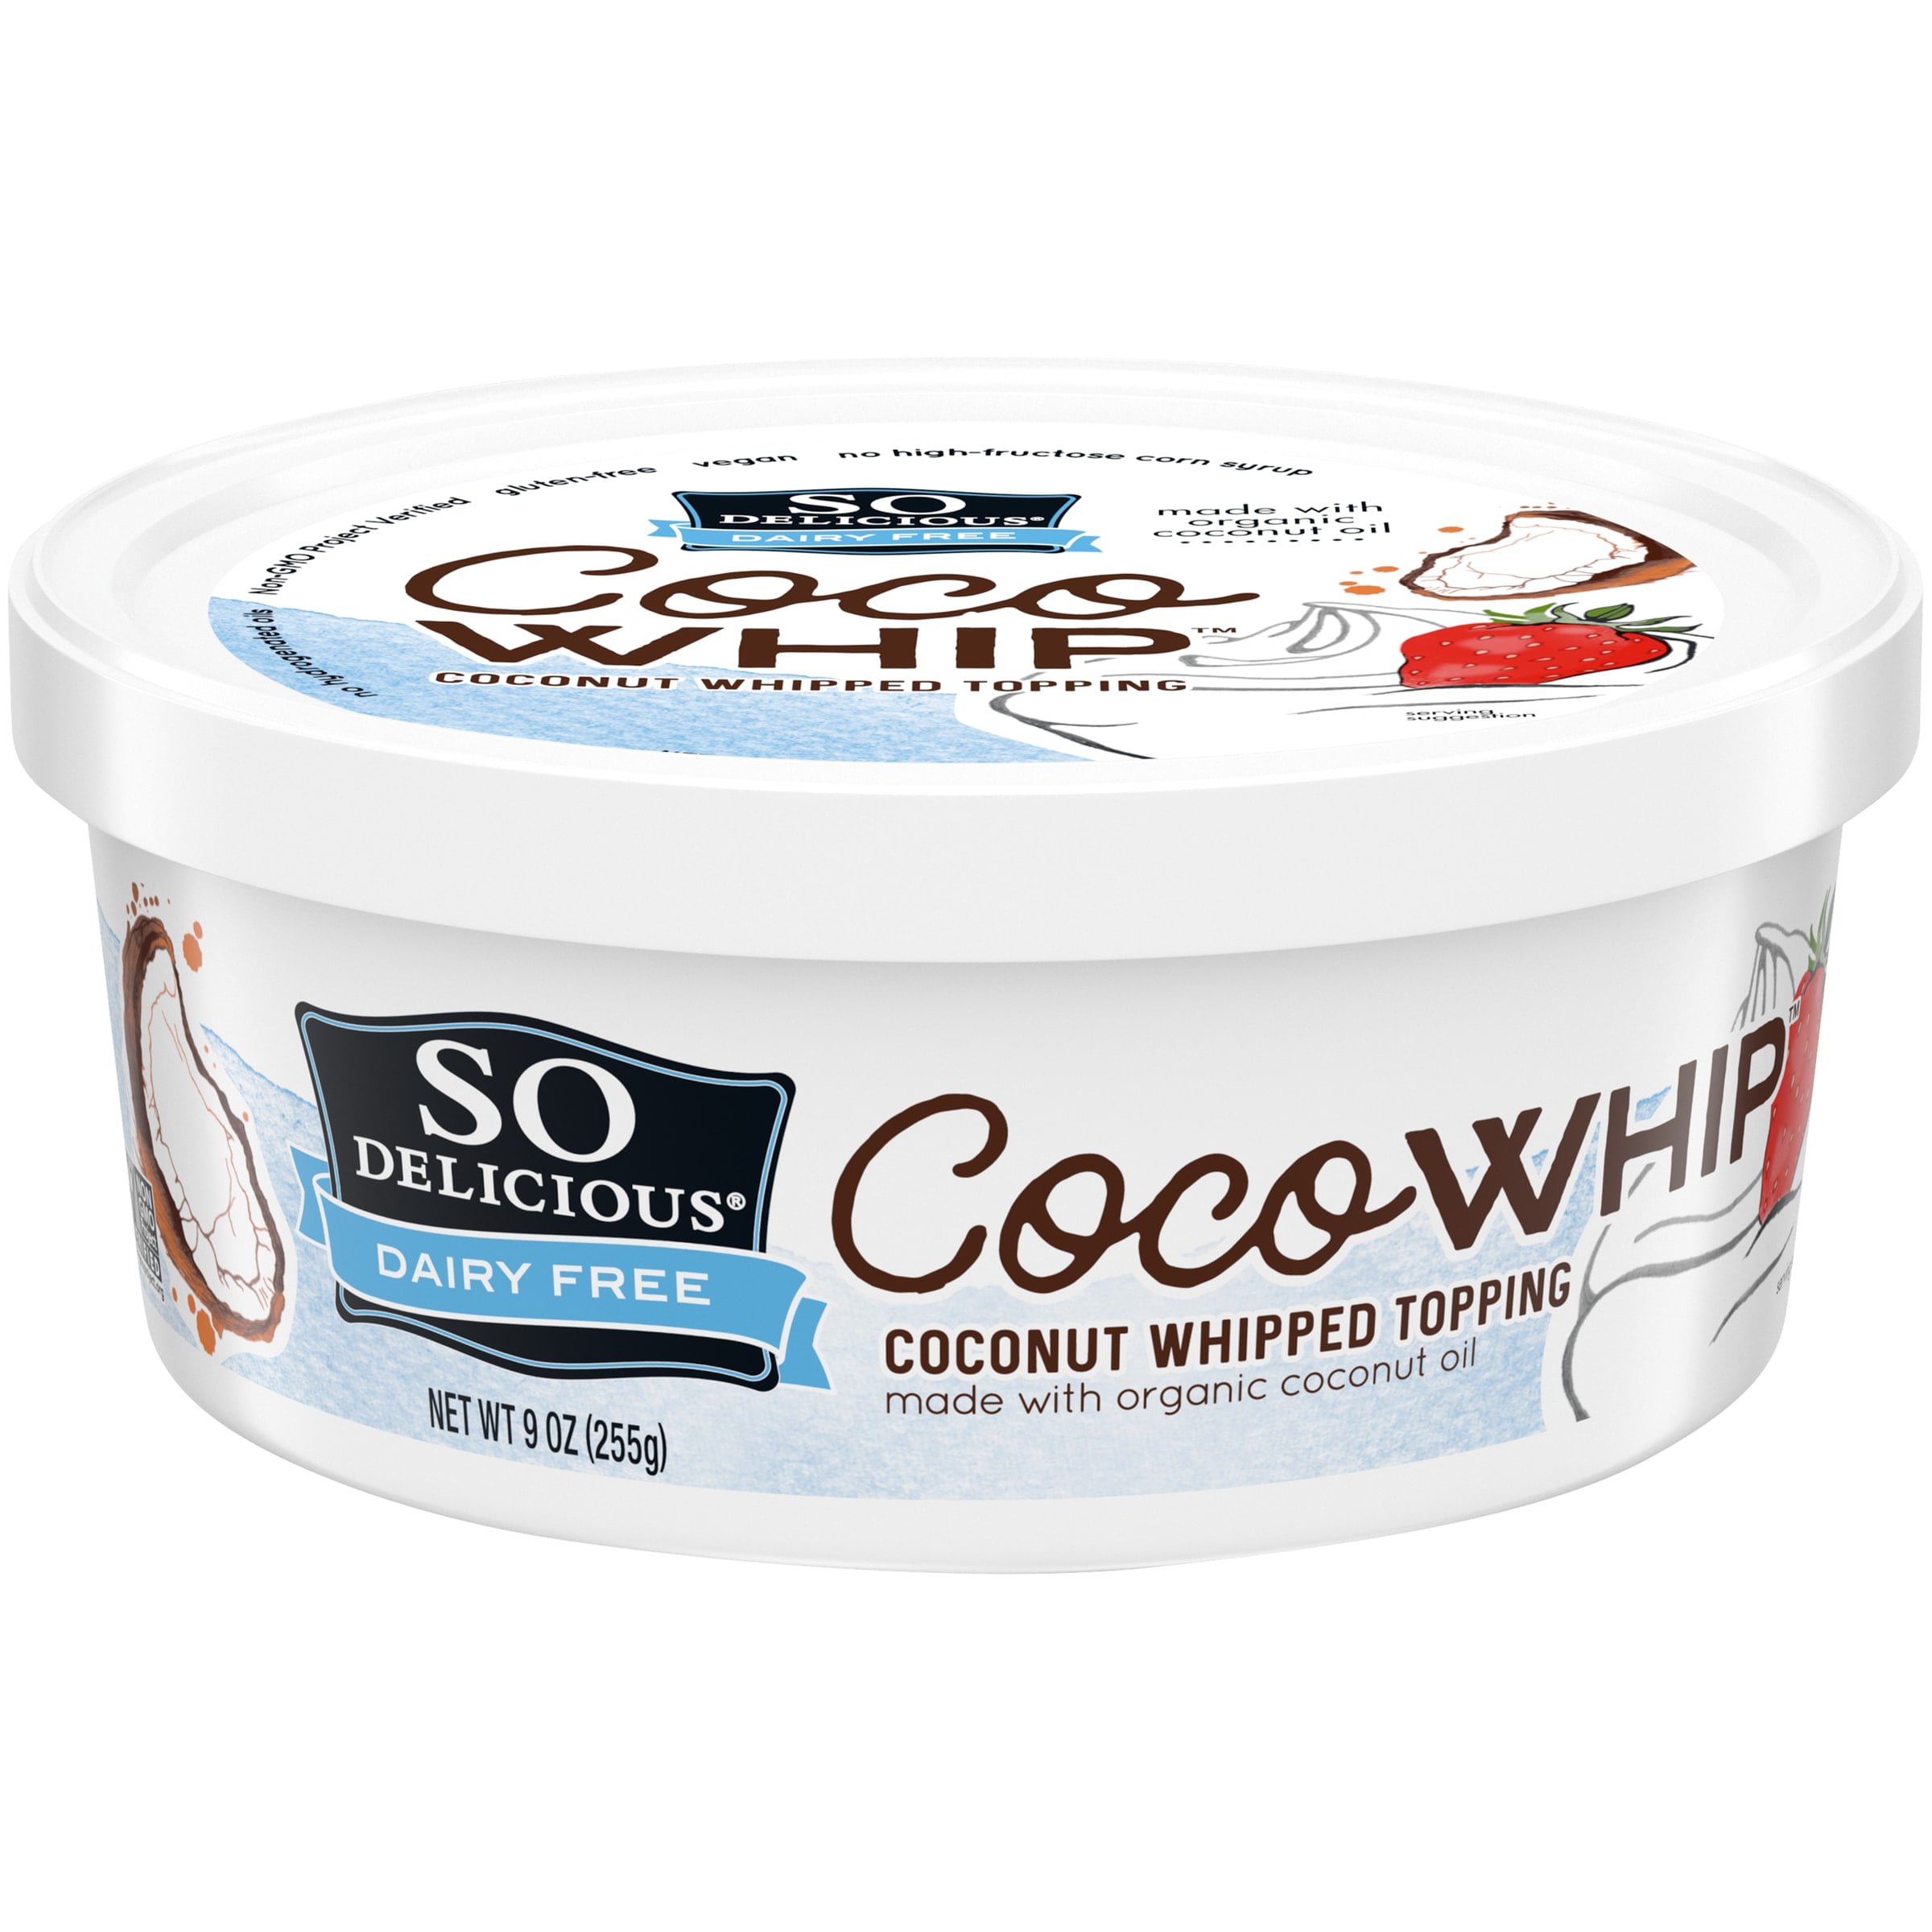 Is it Vegetarian Cool Whip Original Whipped Topping